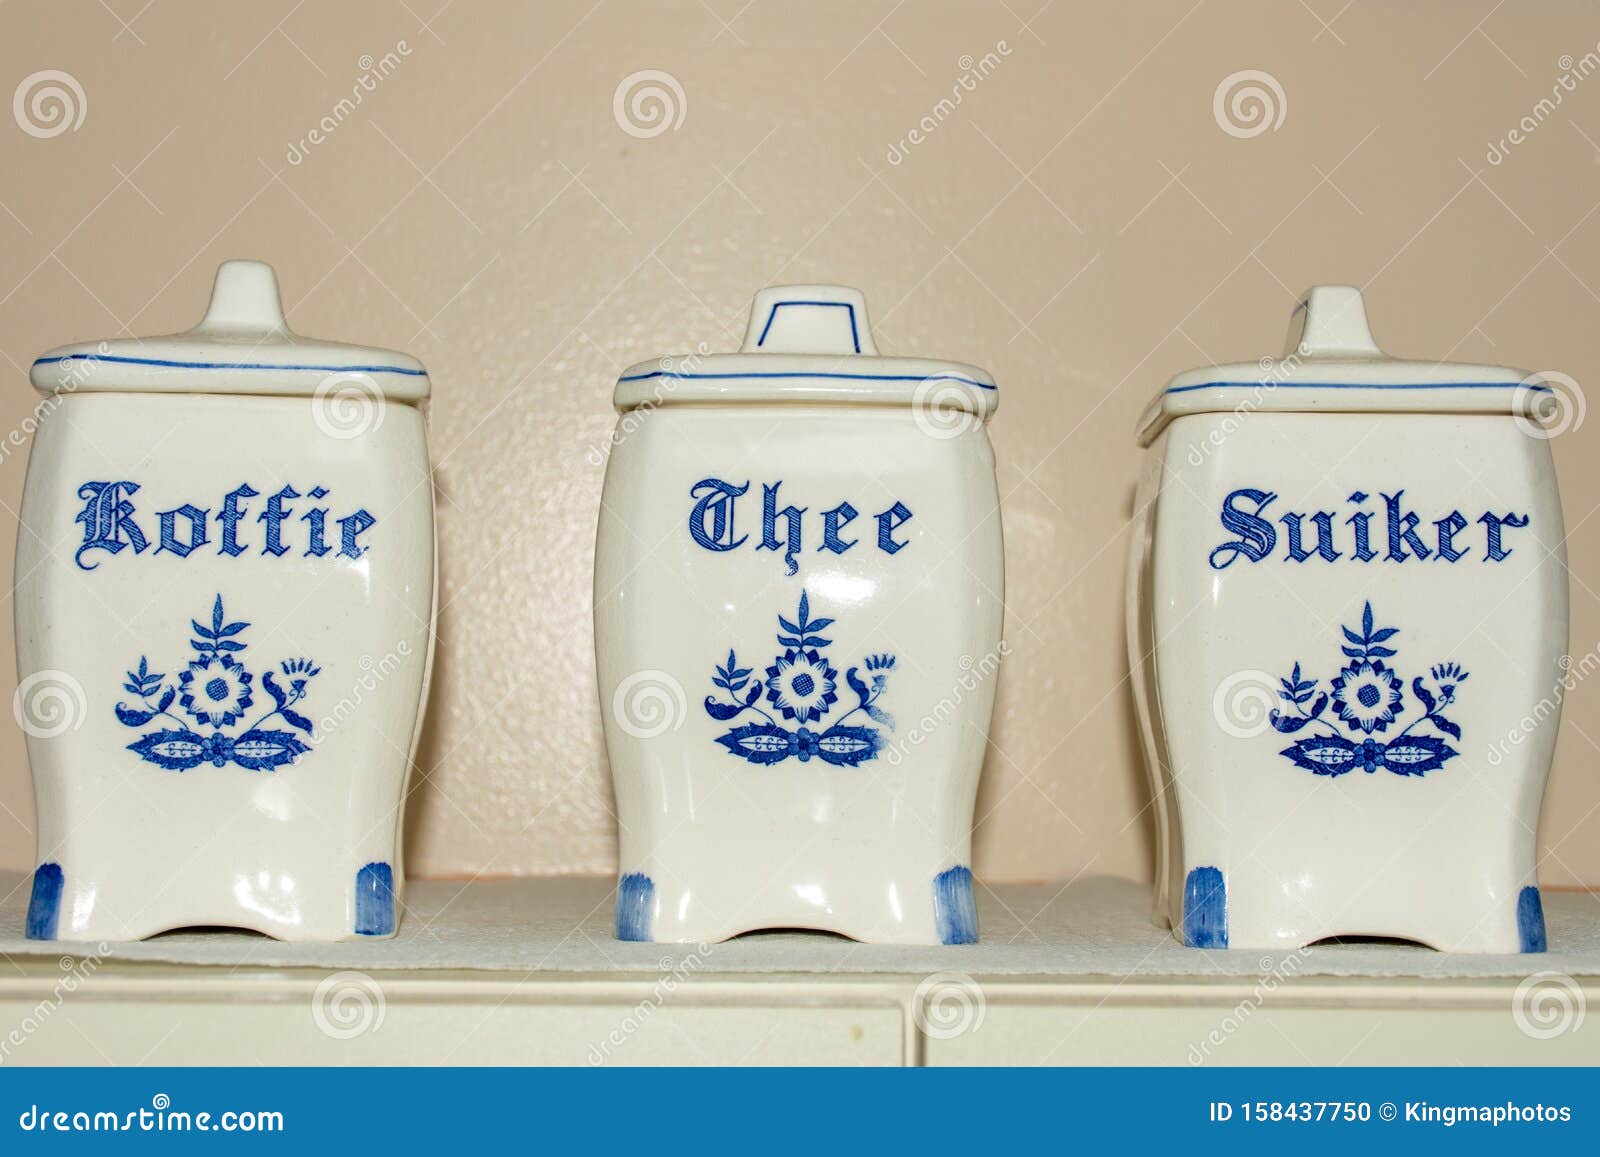 Delft Blue Coffee, Tea, and Sugar Koffie, Thee, Suiker Containers. Famous Porcelain Souvenirs Holland/Netherlands. Isolated Photo - Image europe, dutch: 158437750